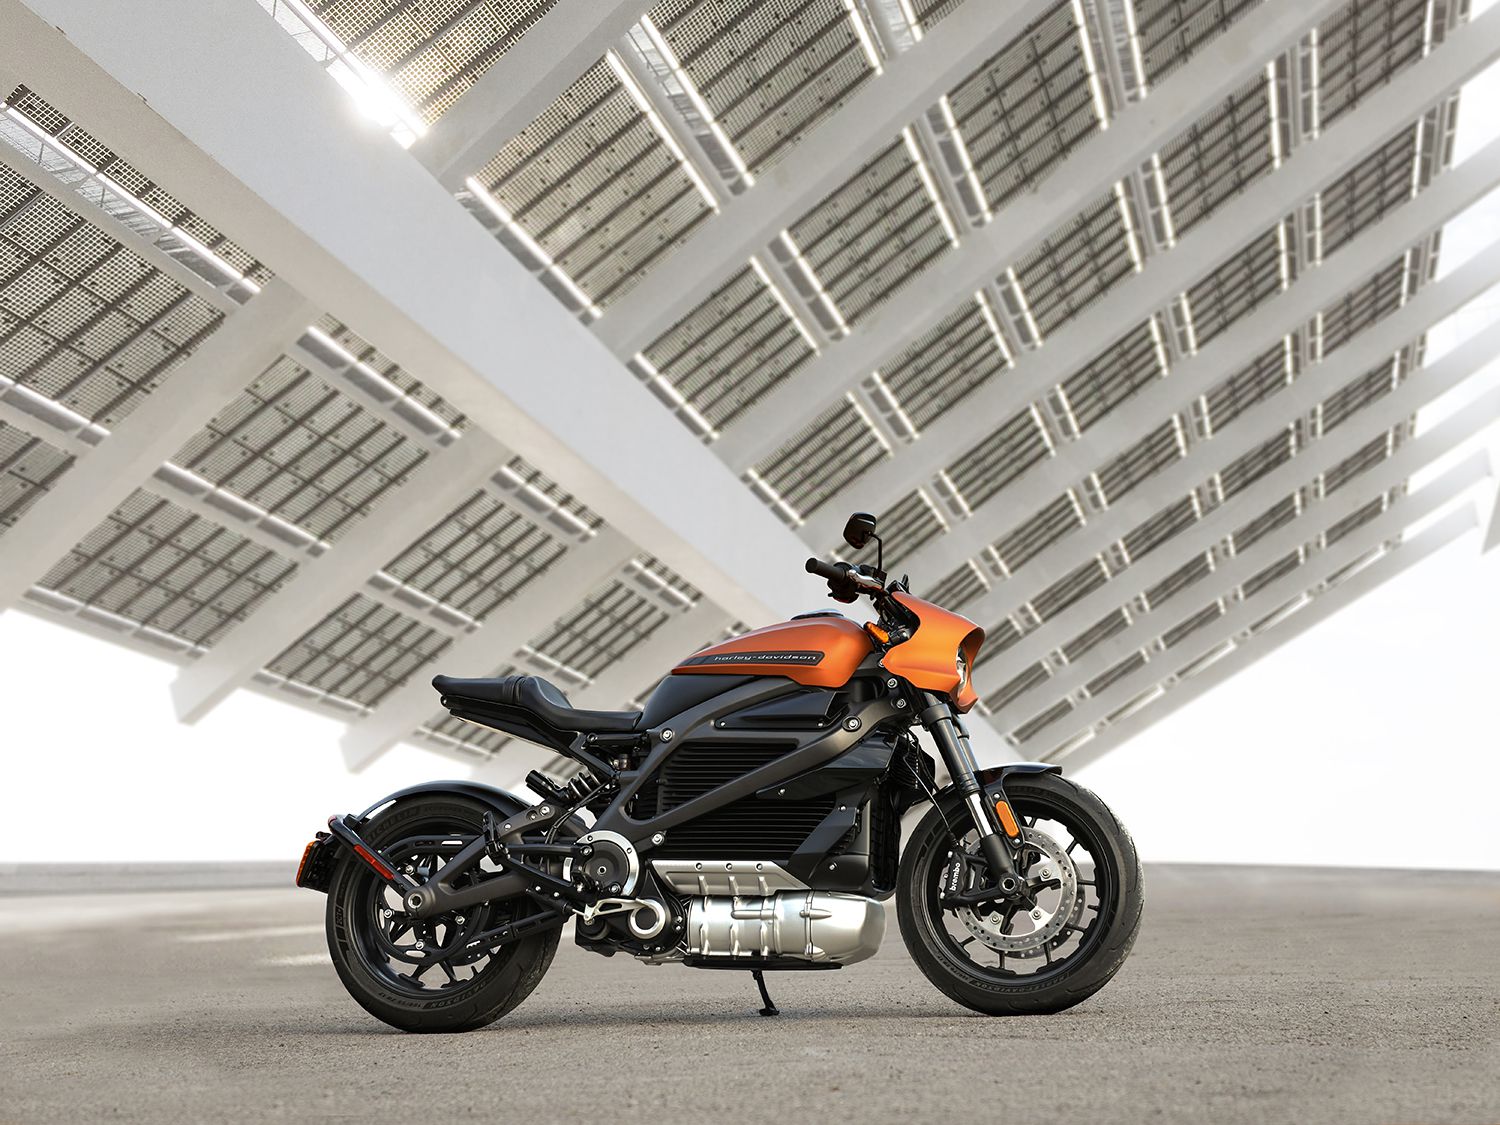 Harley Davidson Livewire Preview And Specifications Motorcyclist